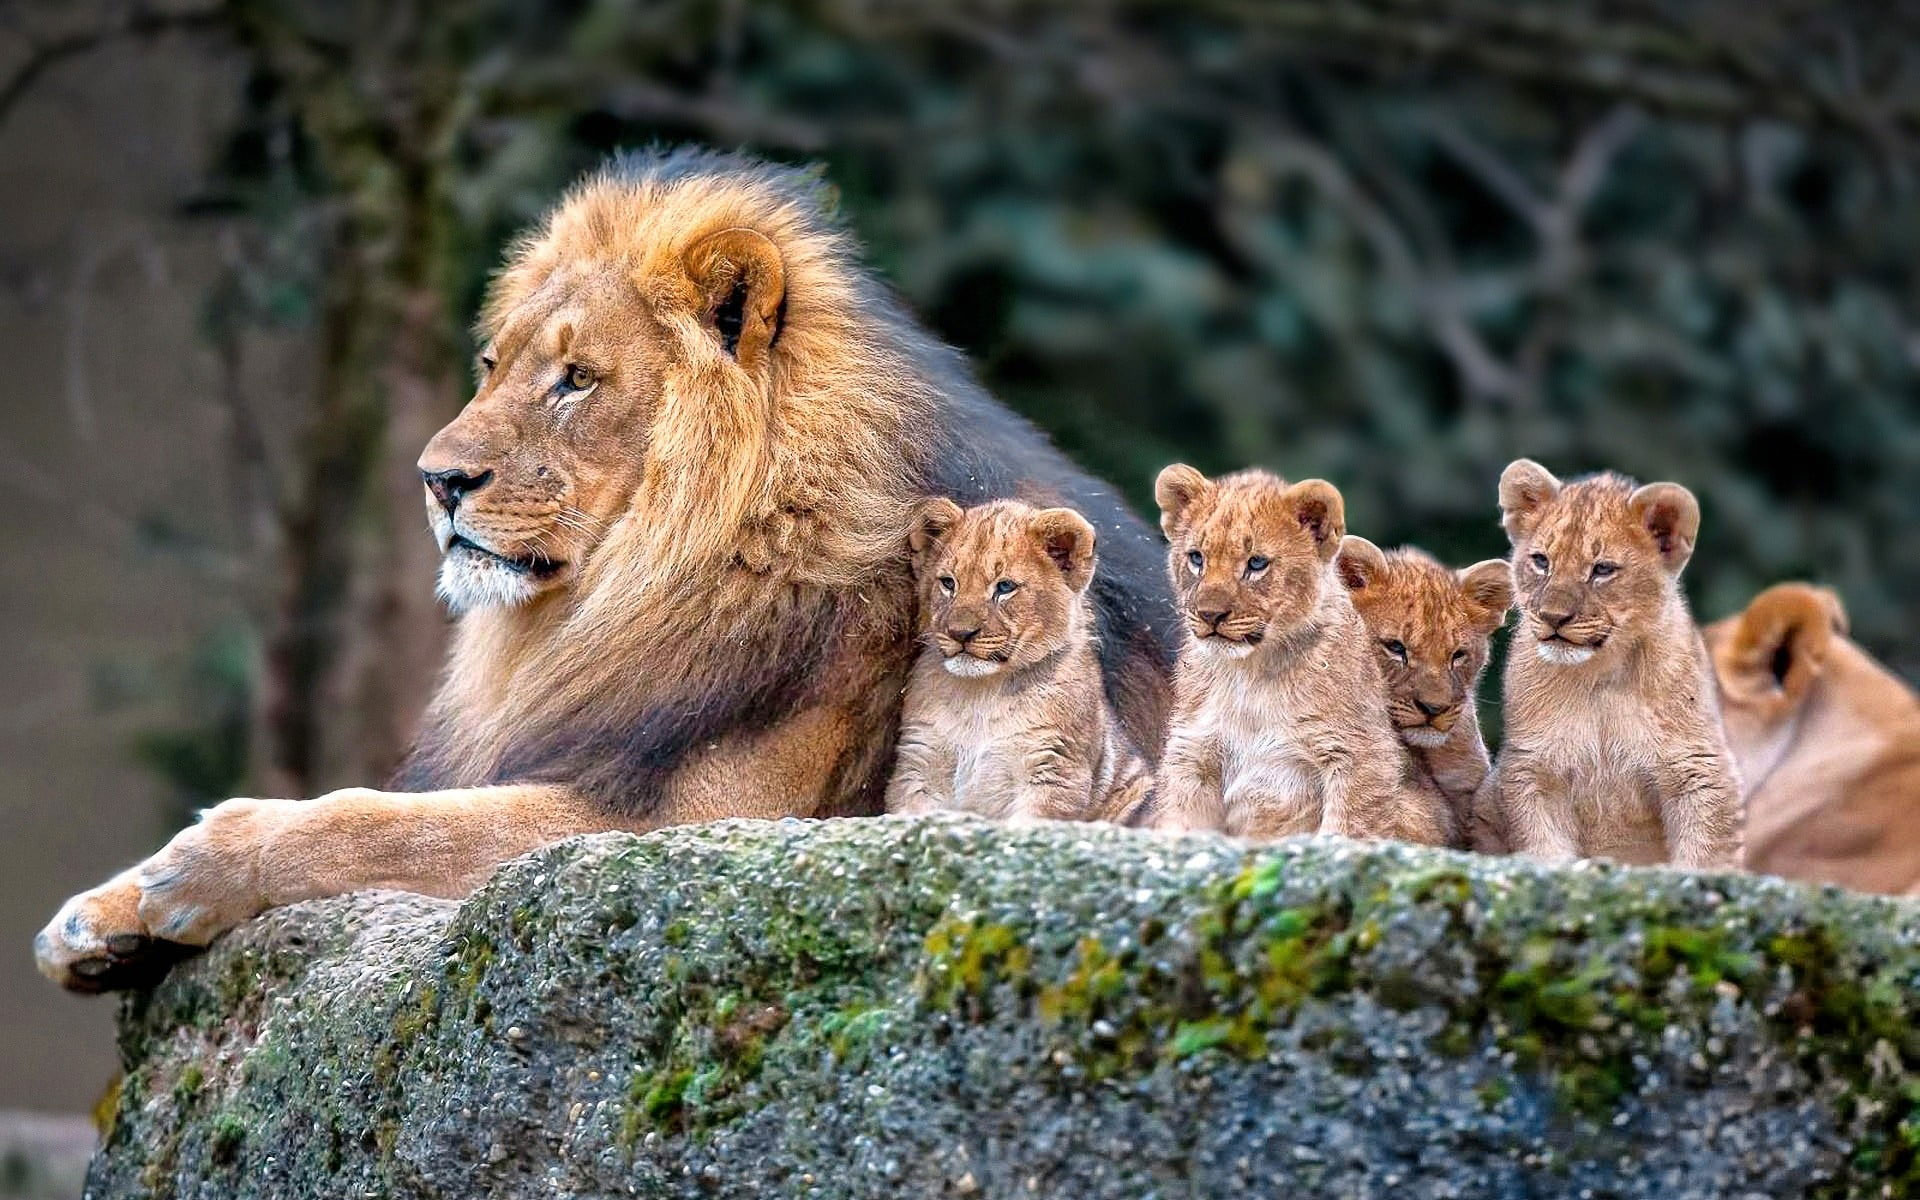 Wallpaper Lion And Baby Lions, Nature, Animals, Baby Animal